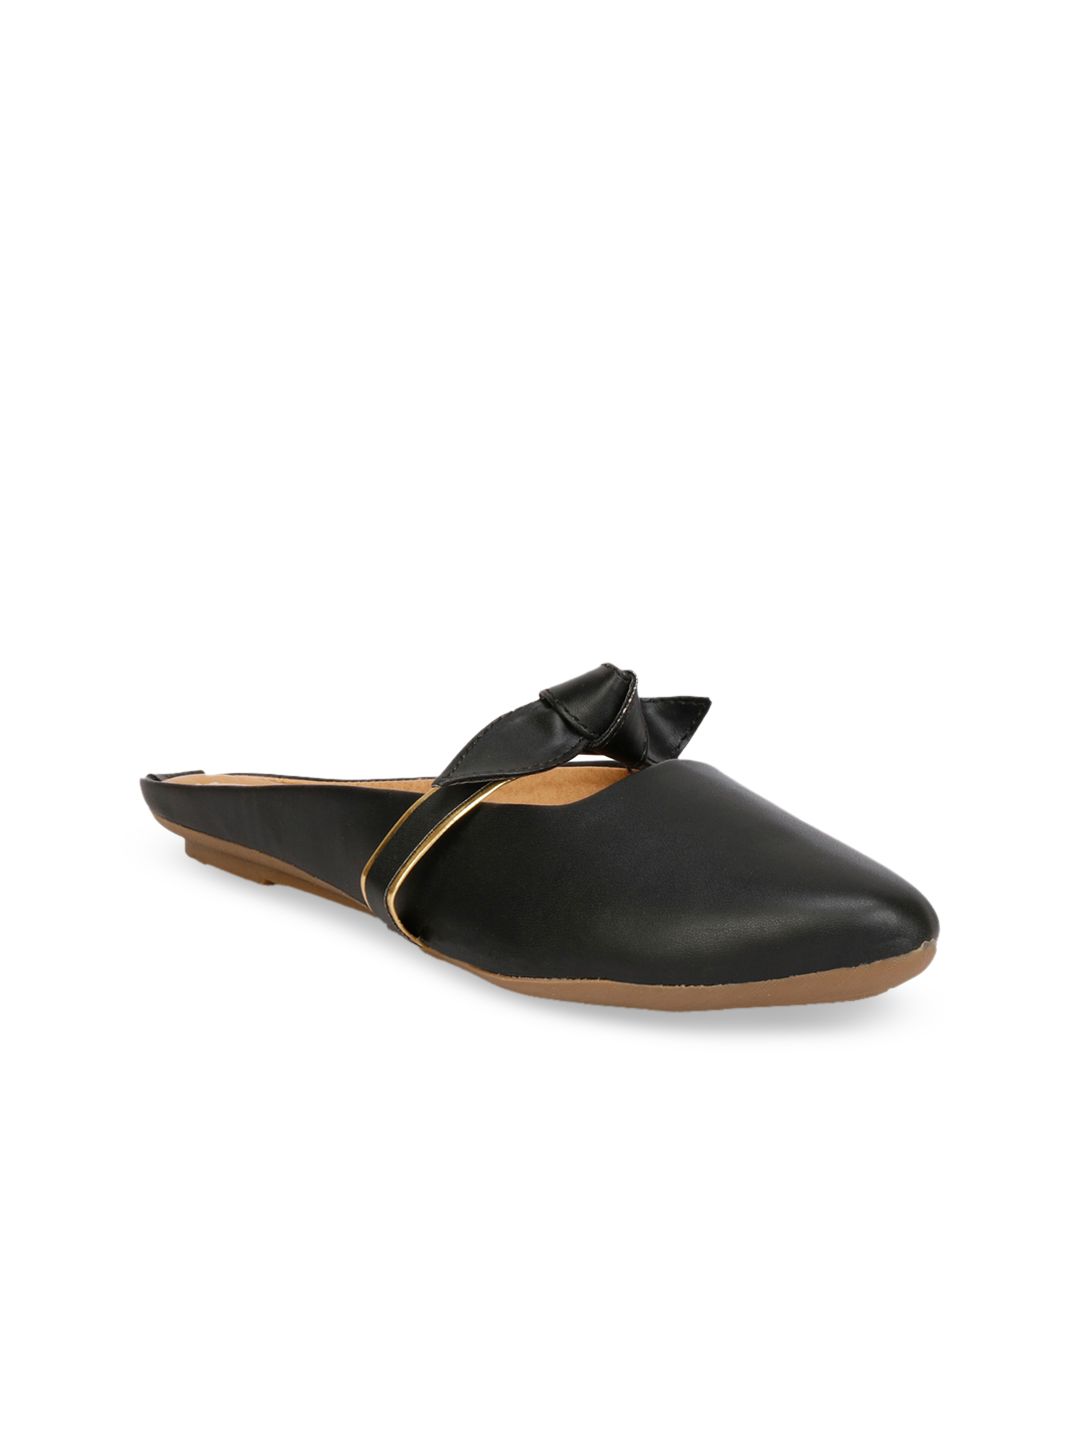 Denill Women Black Mules with Bows Flats Price in India